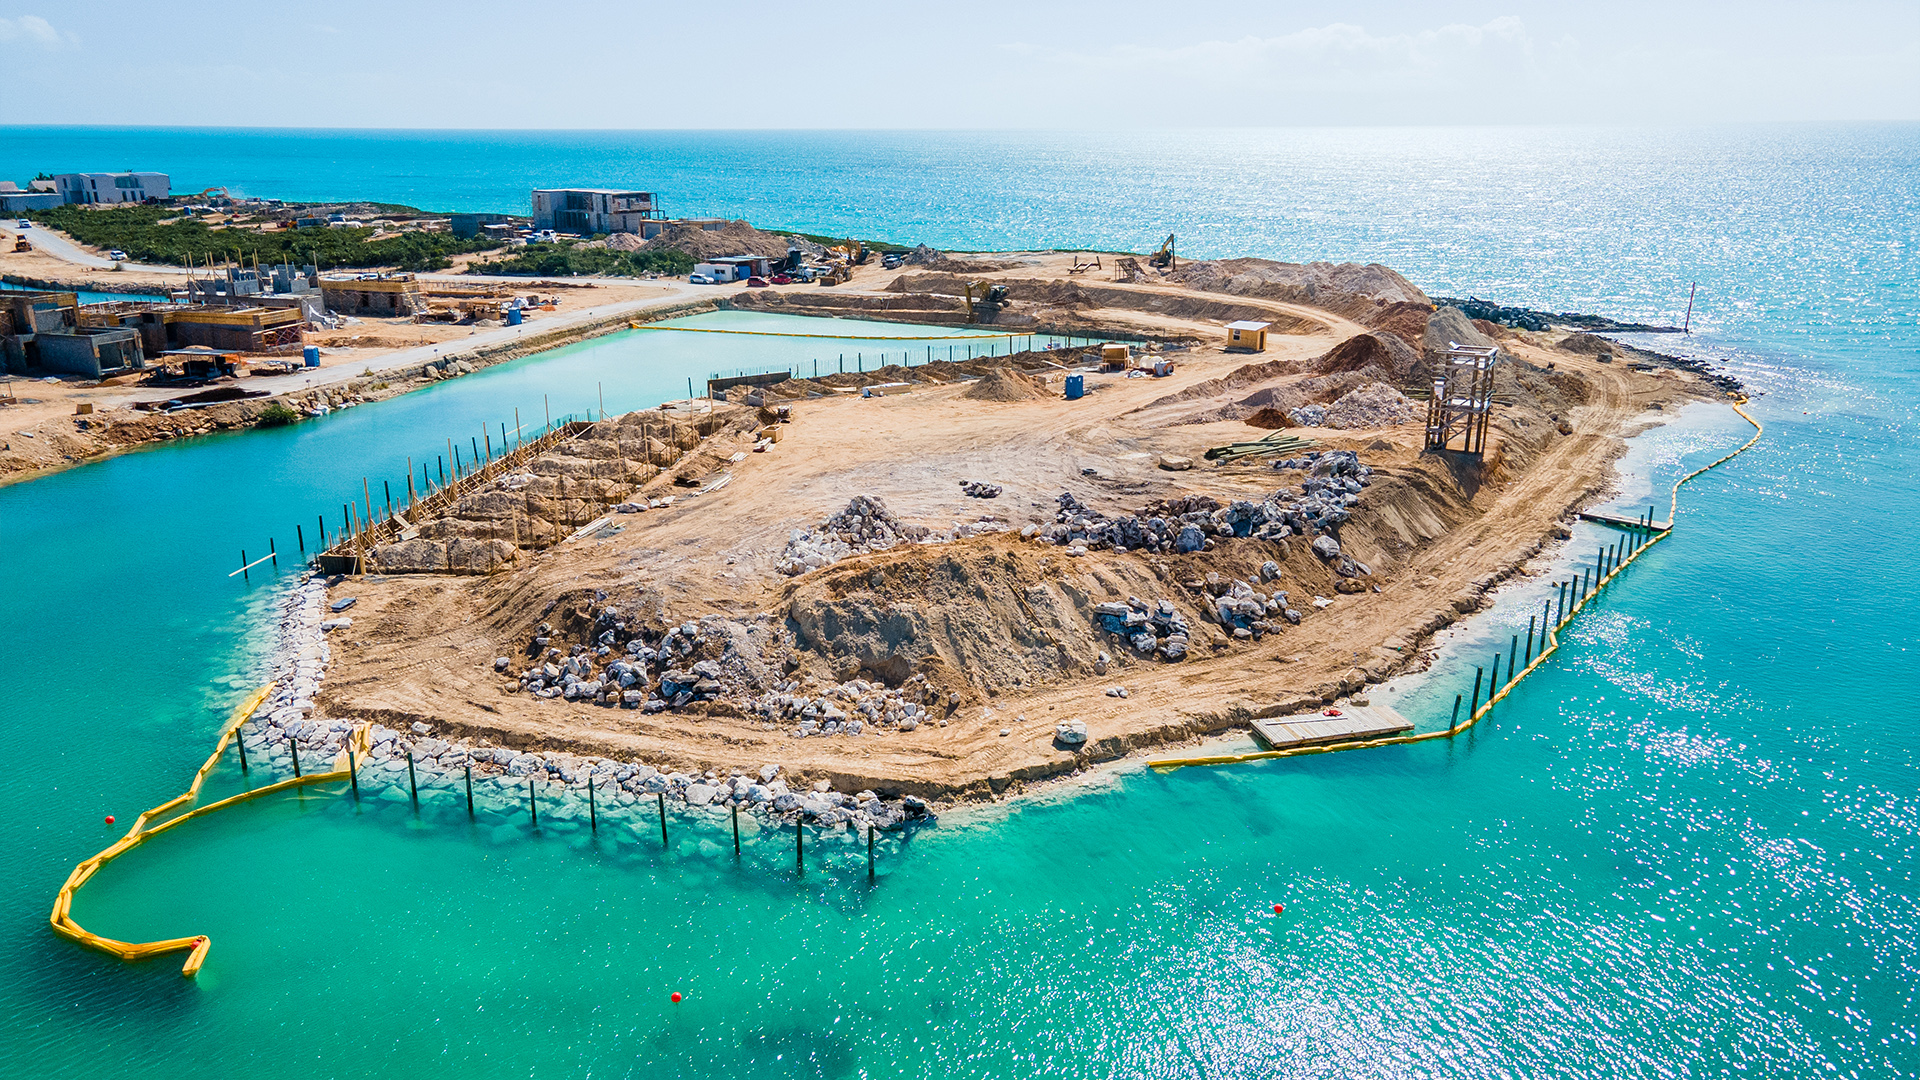 ©South Bank | Construction | Aerial View of The Launch